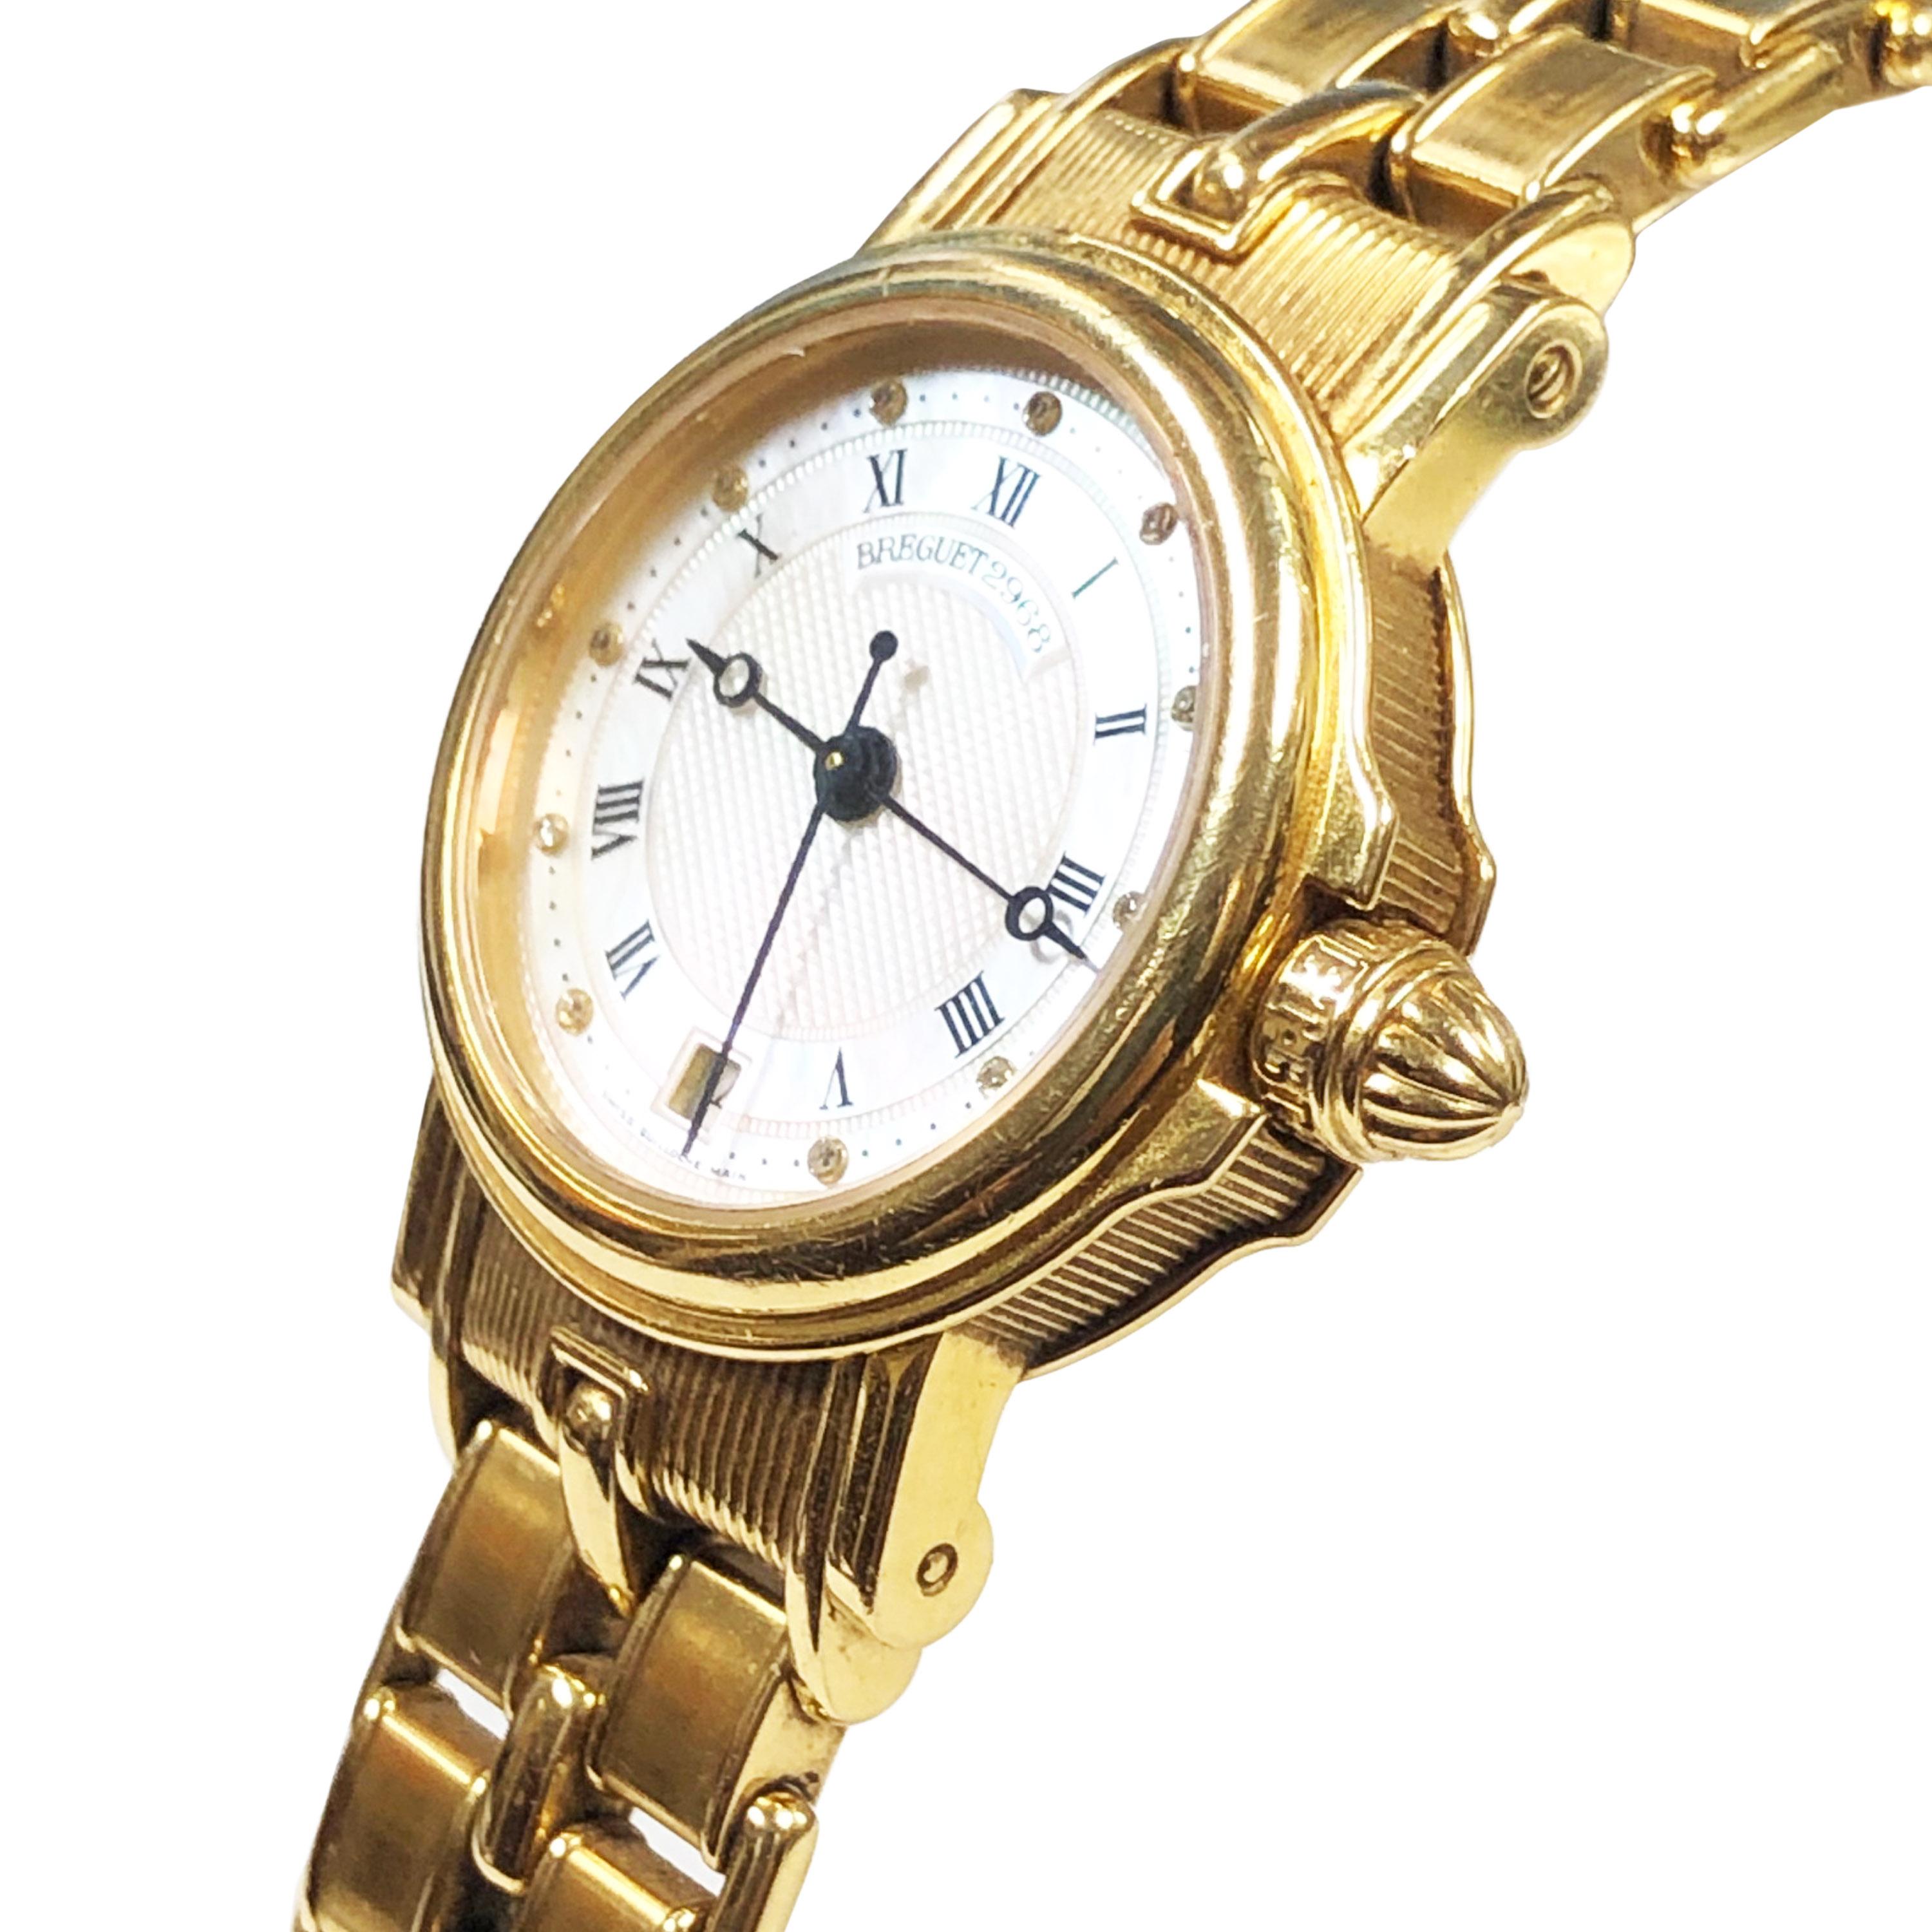 Circa 2005 Breguet Marine collection Ladies Wrist watch, 26 MM Diameter 18K yellow Gold 7 MM thick Water Resistant Case.  Automatic, self winding movement, Mother of Pearl Dial with Diamond set markers and a sweep seconds hand. 1/2 inch wide 18K